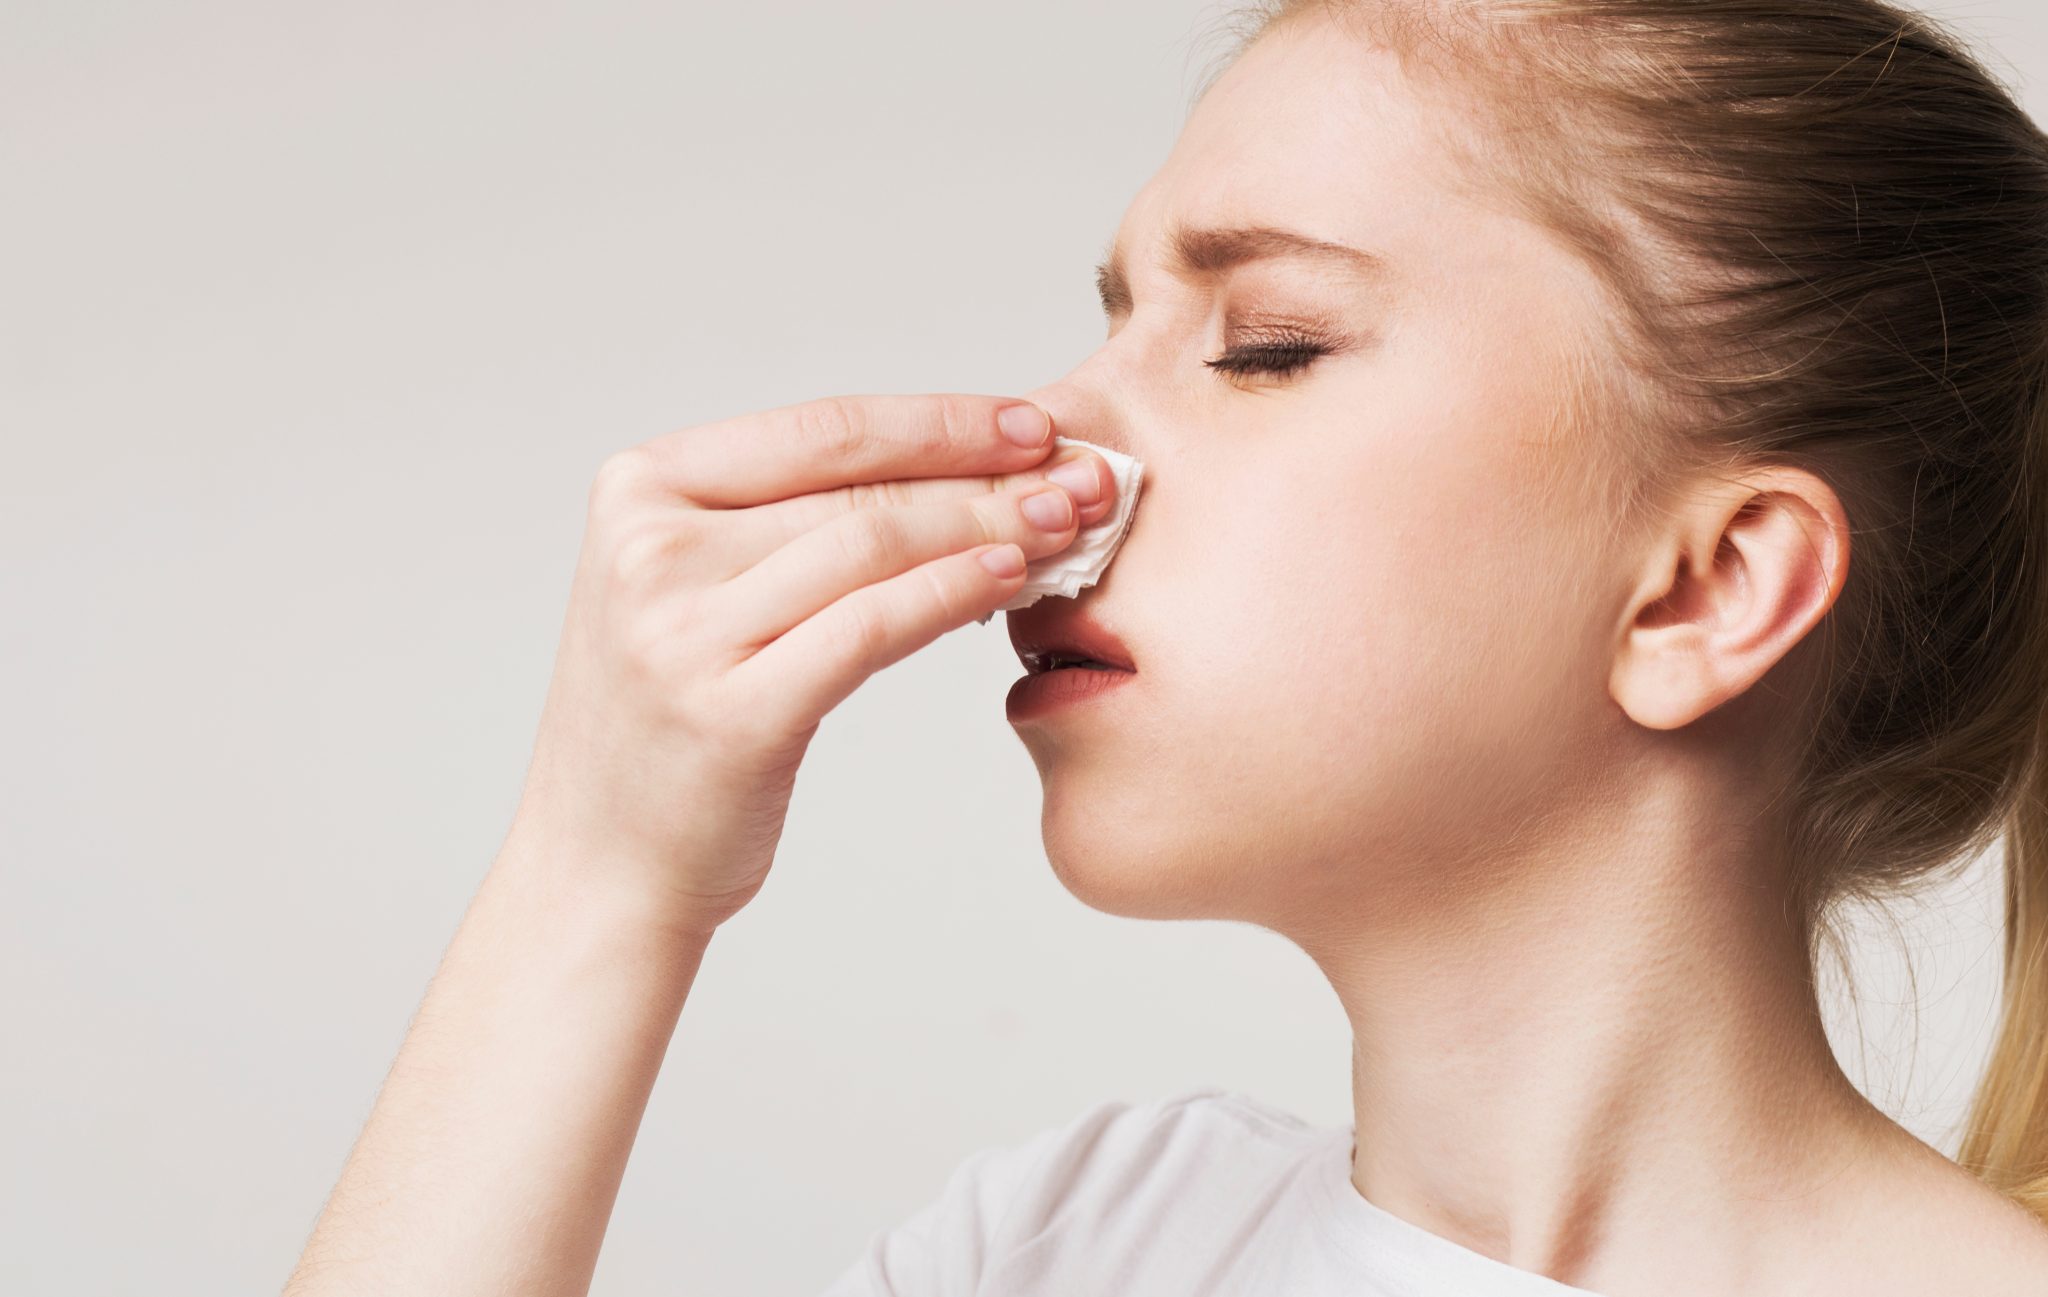 Why does the nasal mucosa bleed?